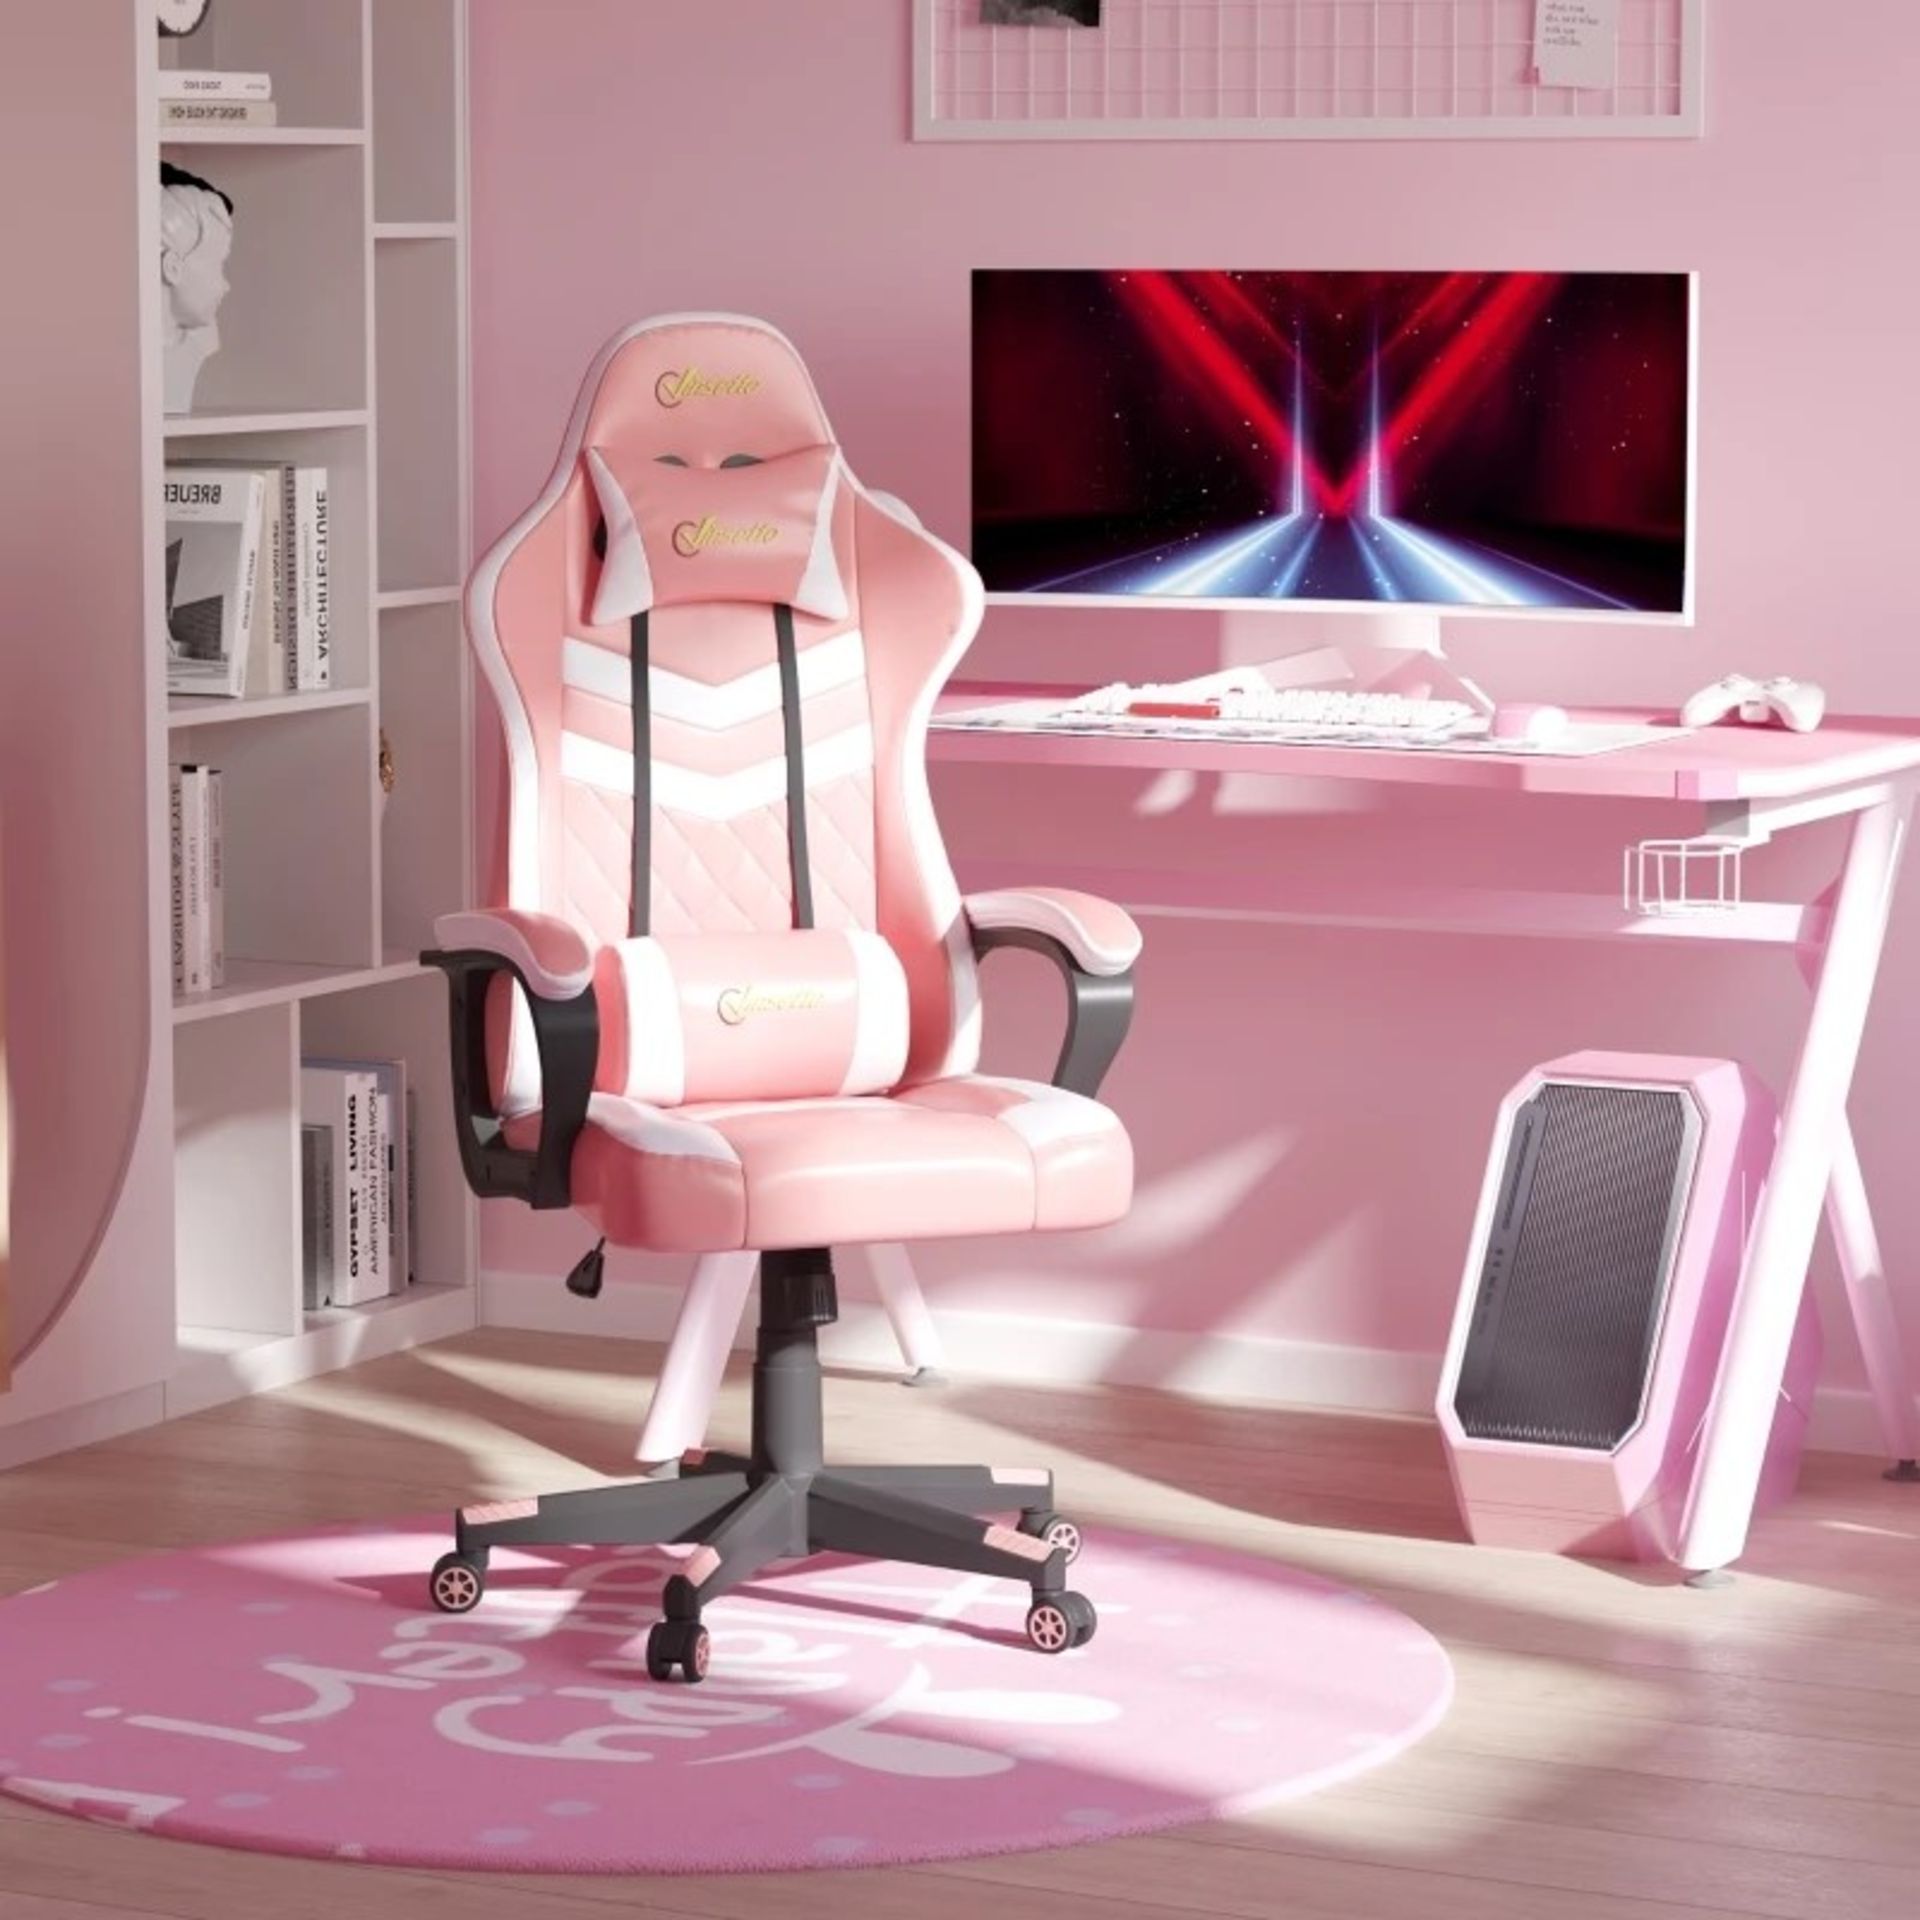 RRP £146.99 - Vinsetto Racing Gaming Chair w/ Lumbar Support, Headrest, Gamer Office Chair, Pink